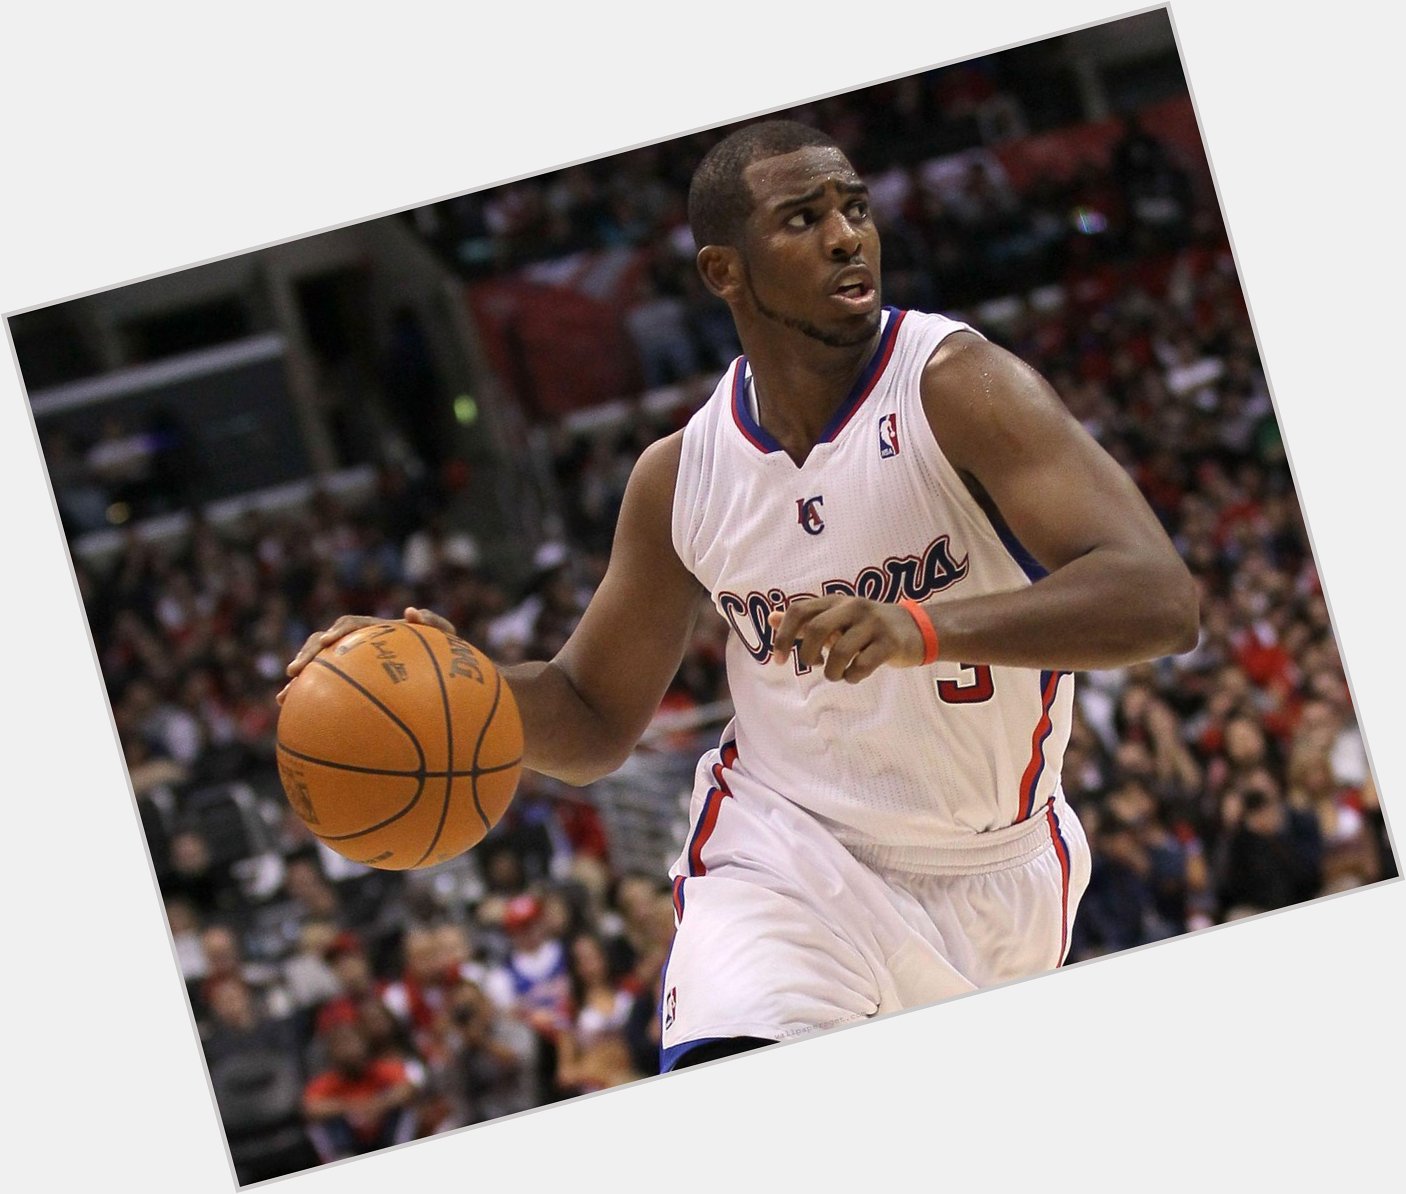 Happy 30th birthday to LA Clippers point guard Chris Paul. to wish him a happy birthday! 